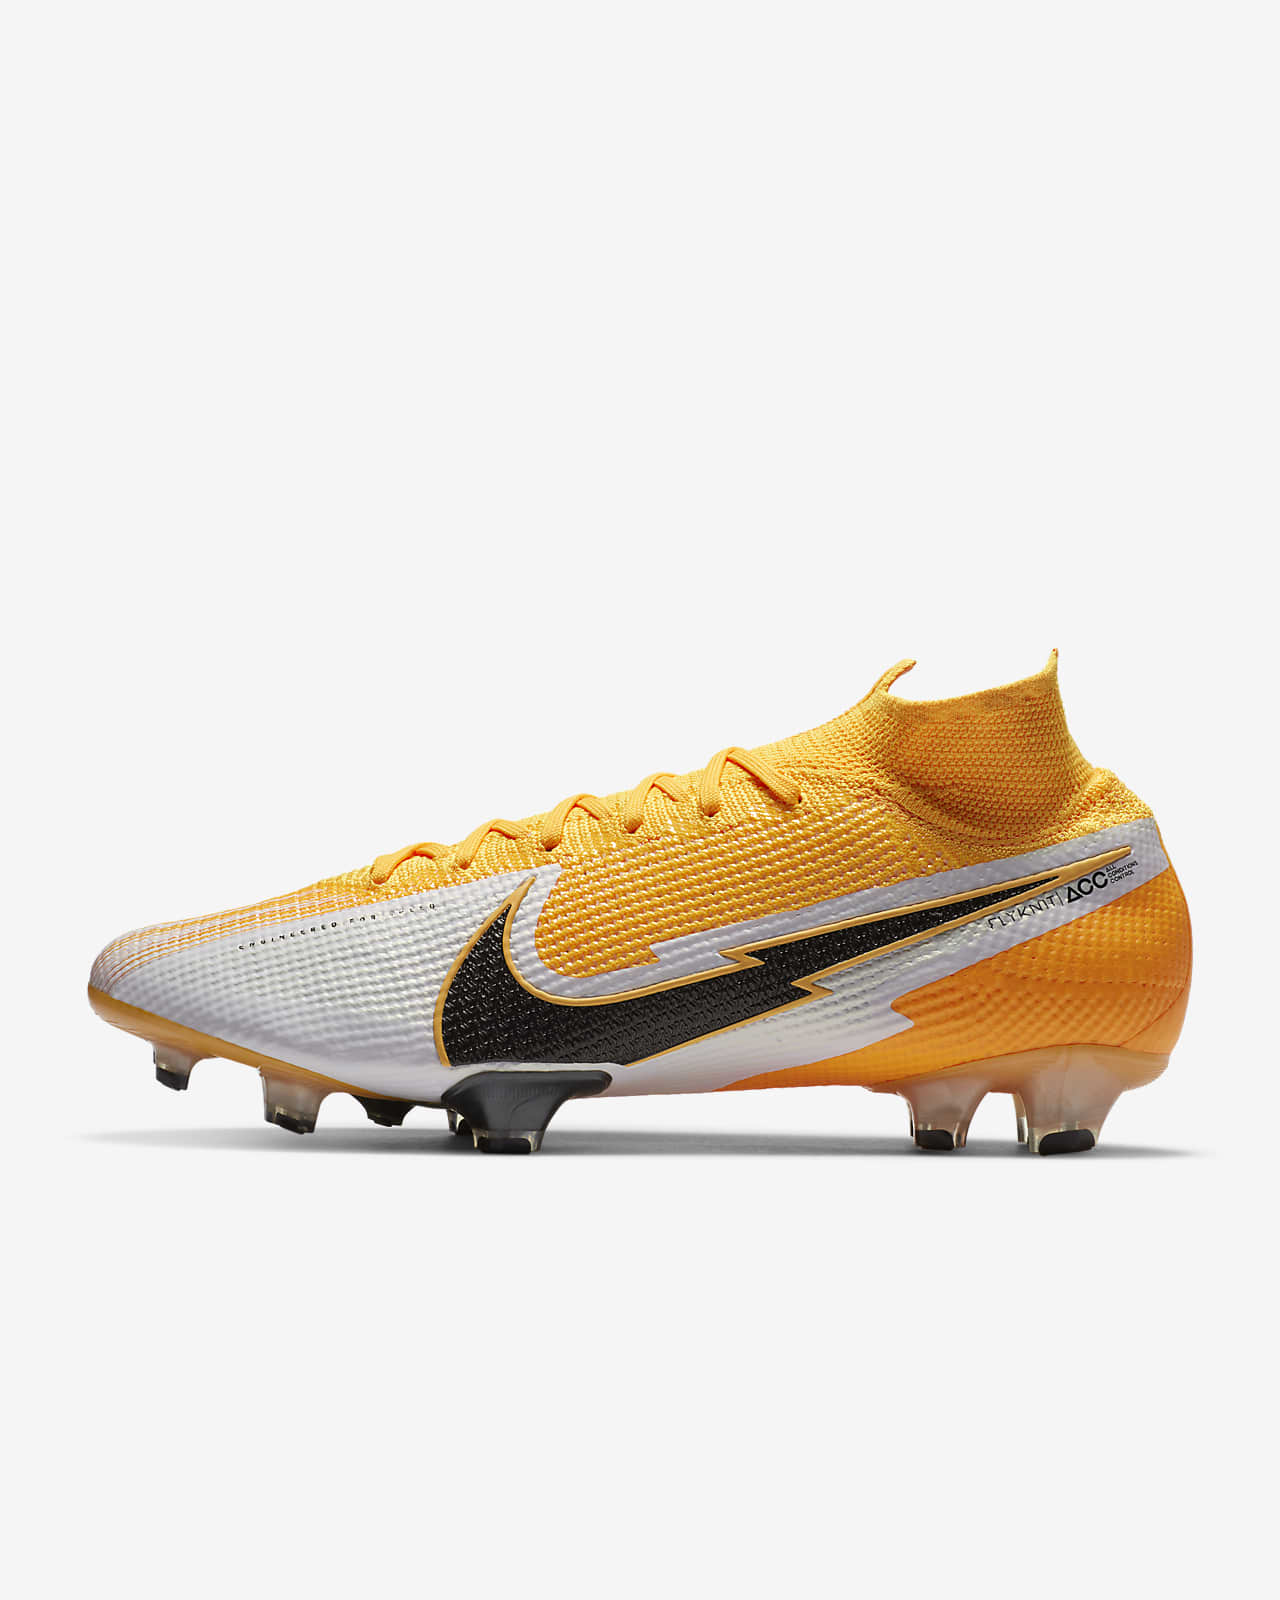 Nike Mercurial Superfly 7 Elite FG Firm-Ground Soccer Cleat. Nike JP